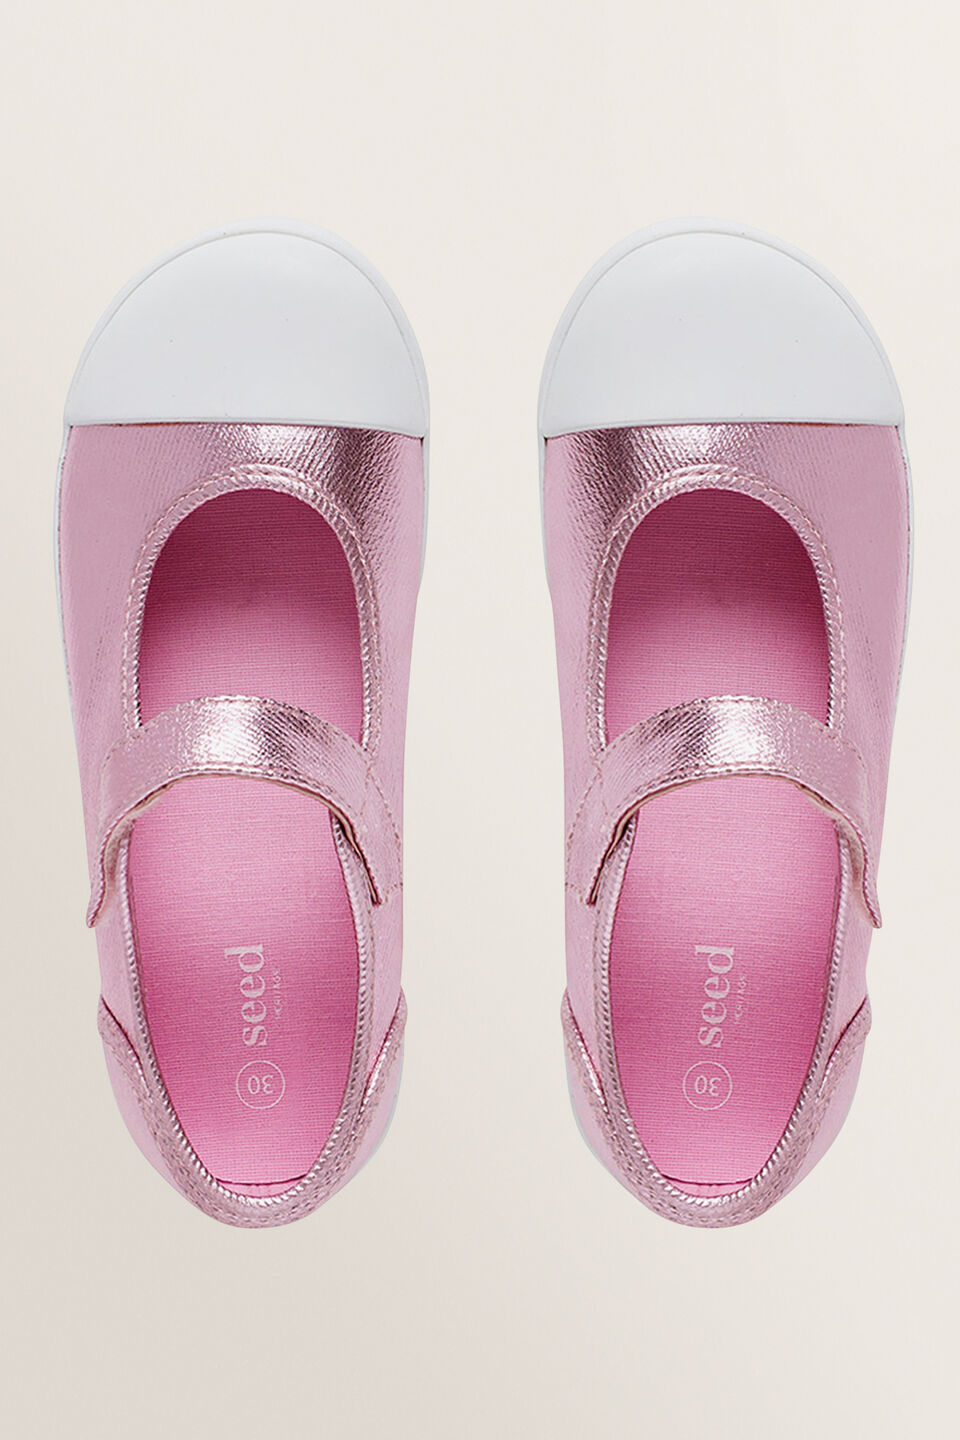 Mary Jane Canvas Shoes  Pink Metallic